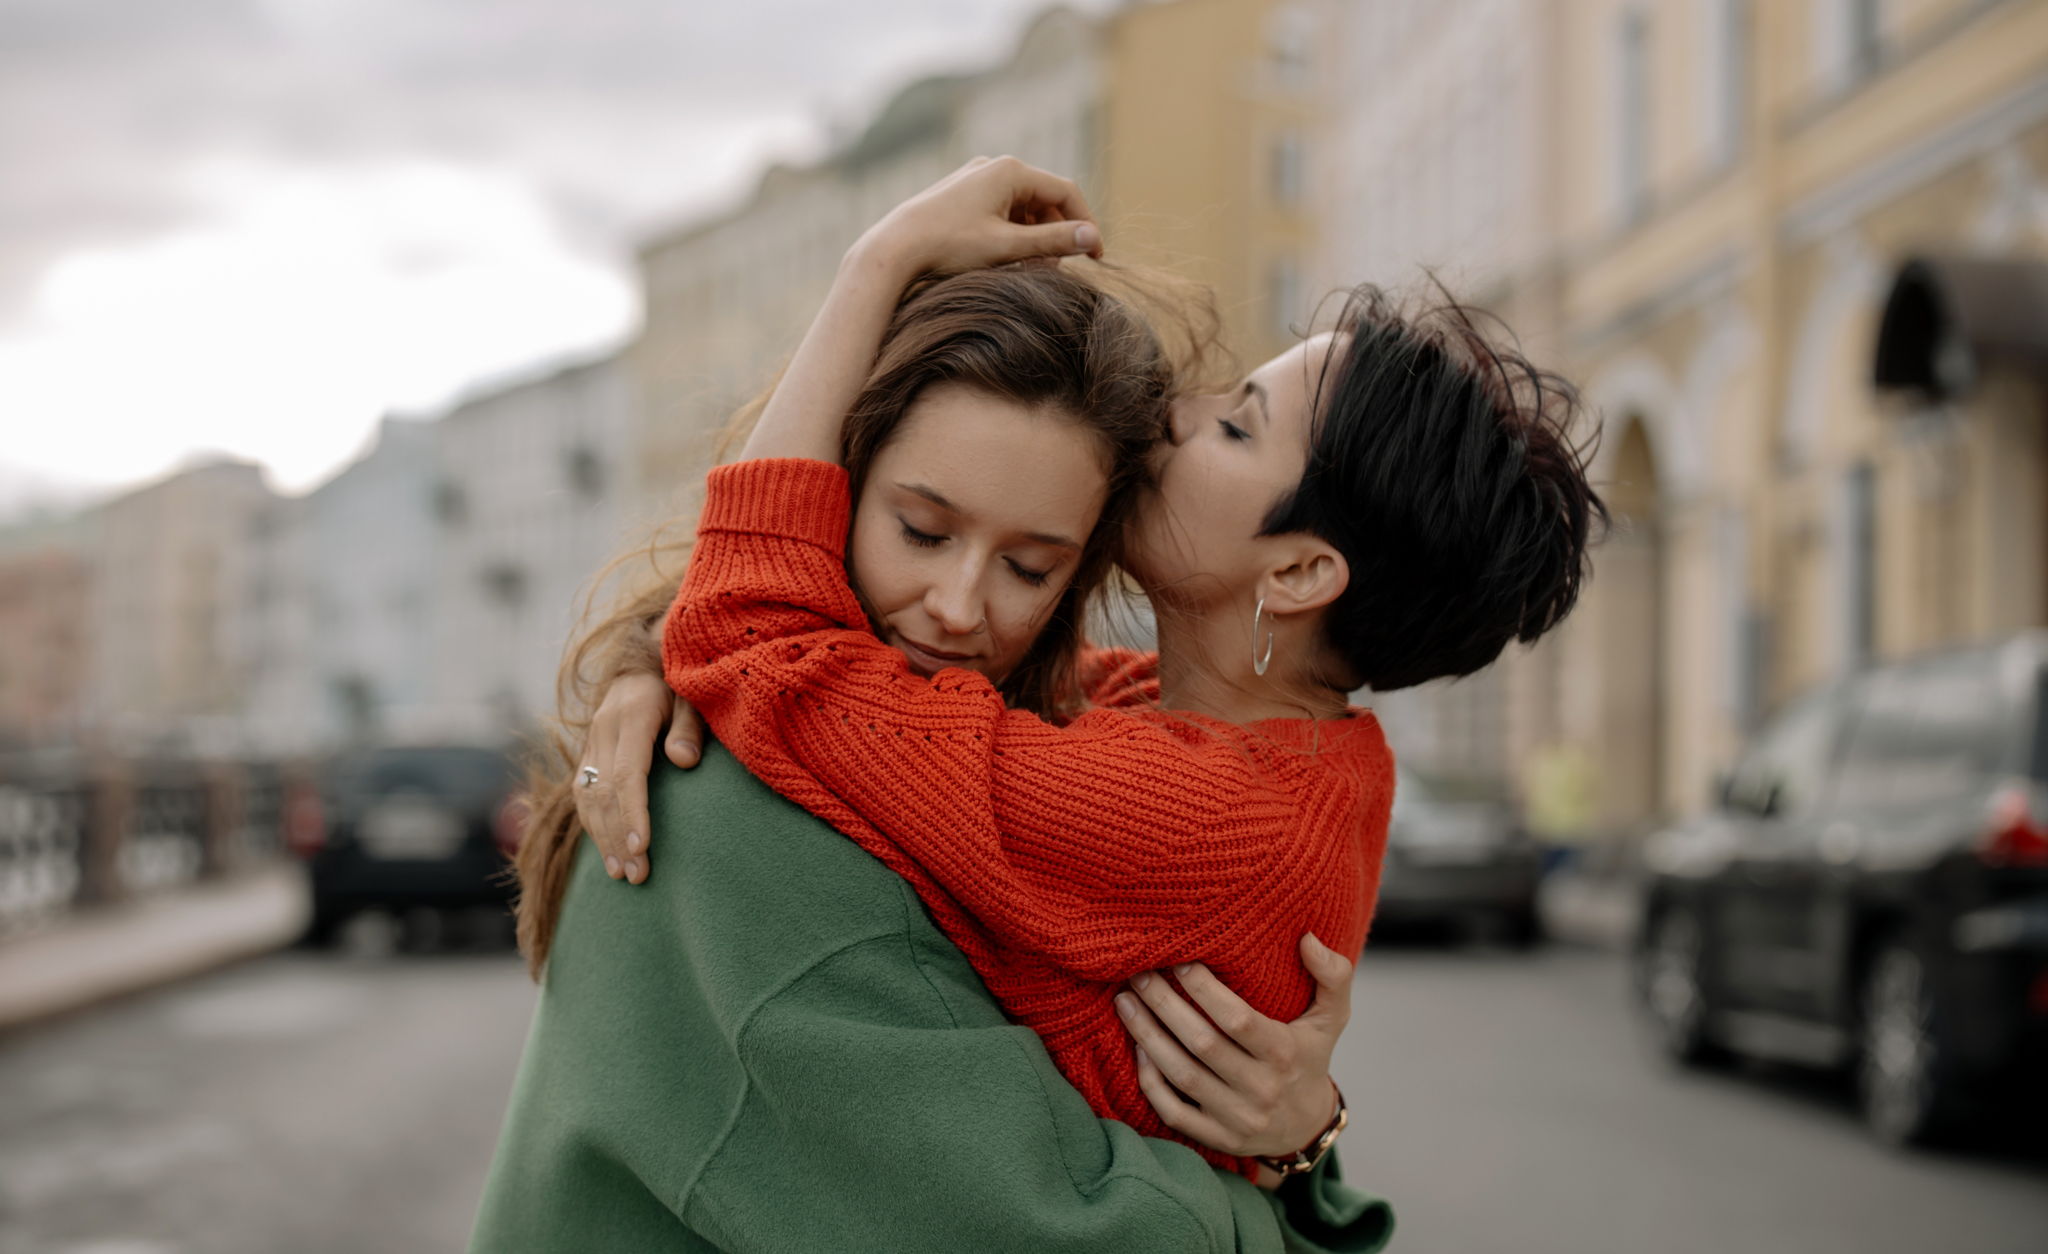 Two women hug while in the street. One is kissing the other on the head while they close their eyes.